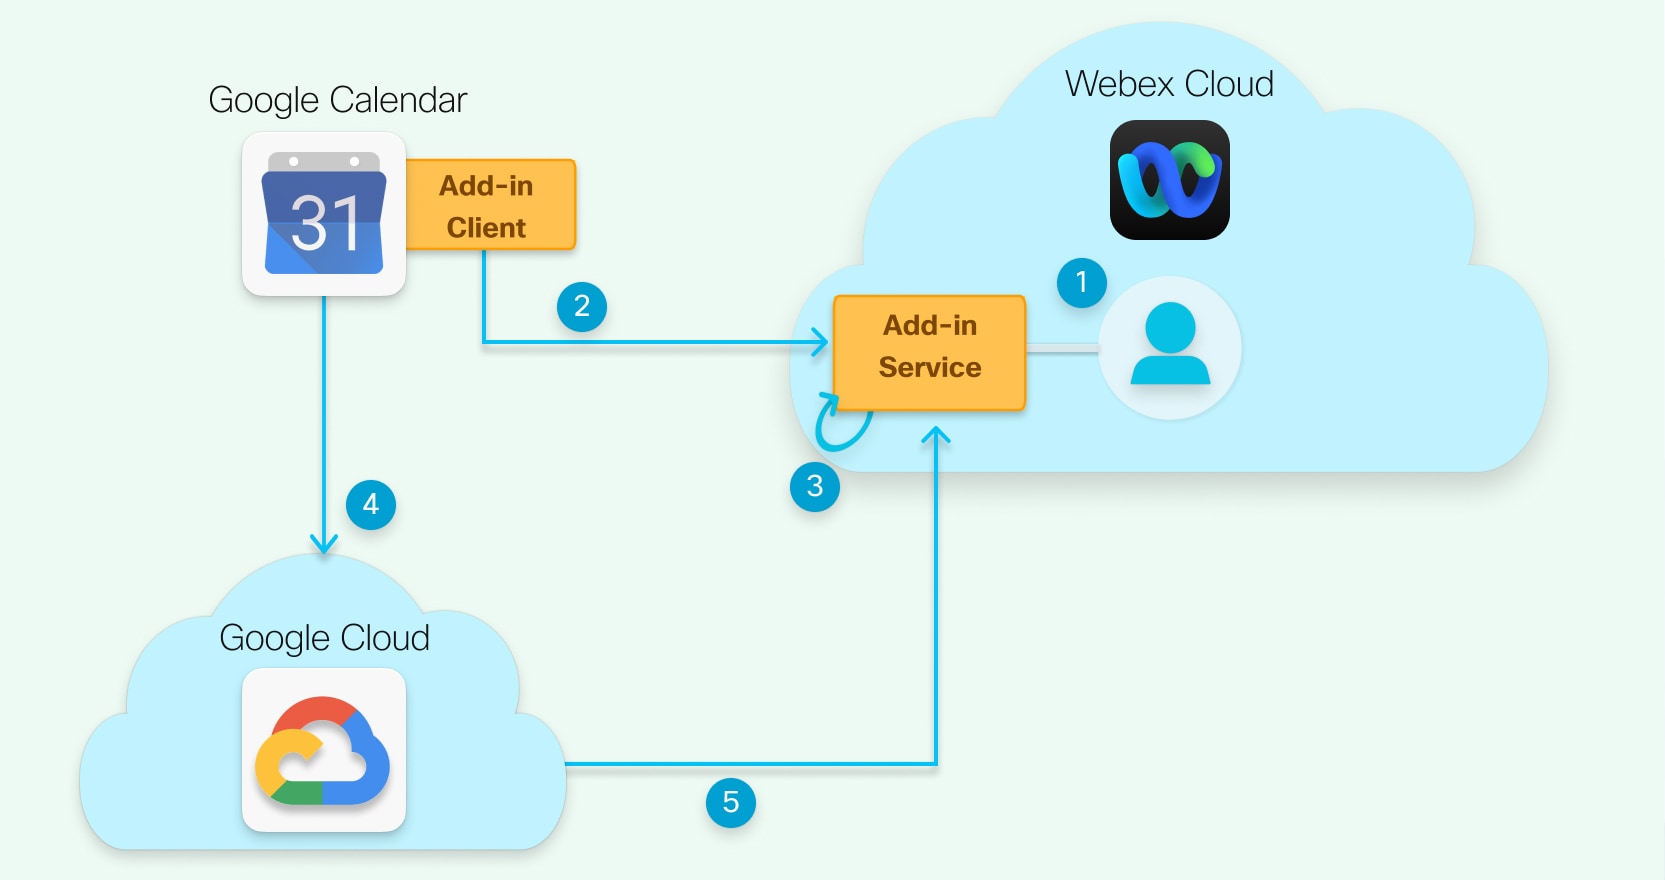 Architecture diagram showing the Google cloud, Webex cloud, and the Google Calendar client, with numbered arrows linking them.